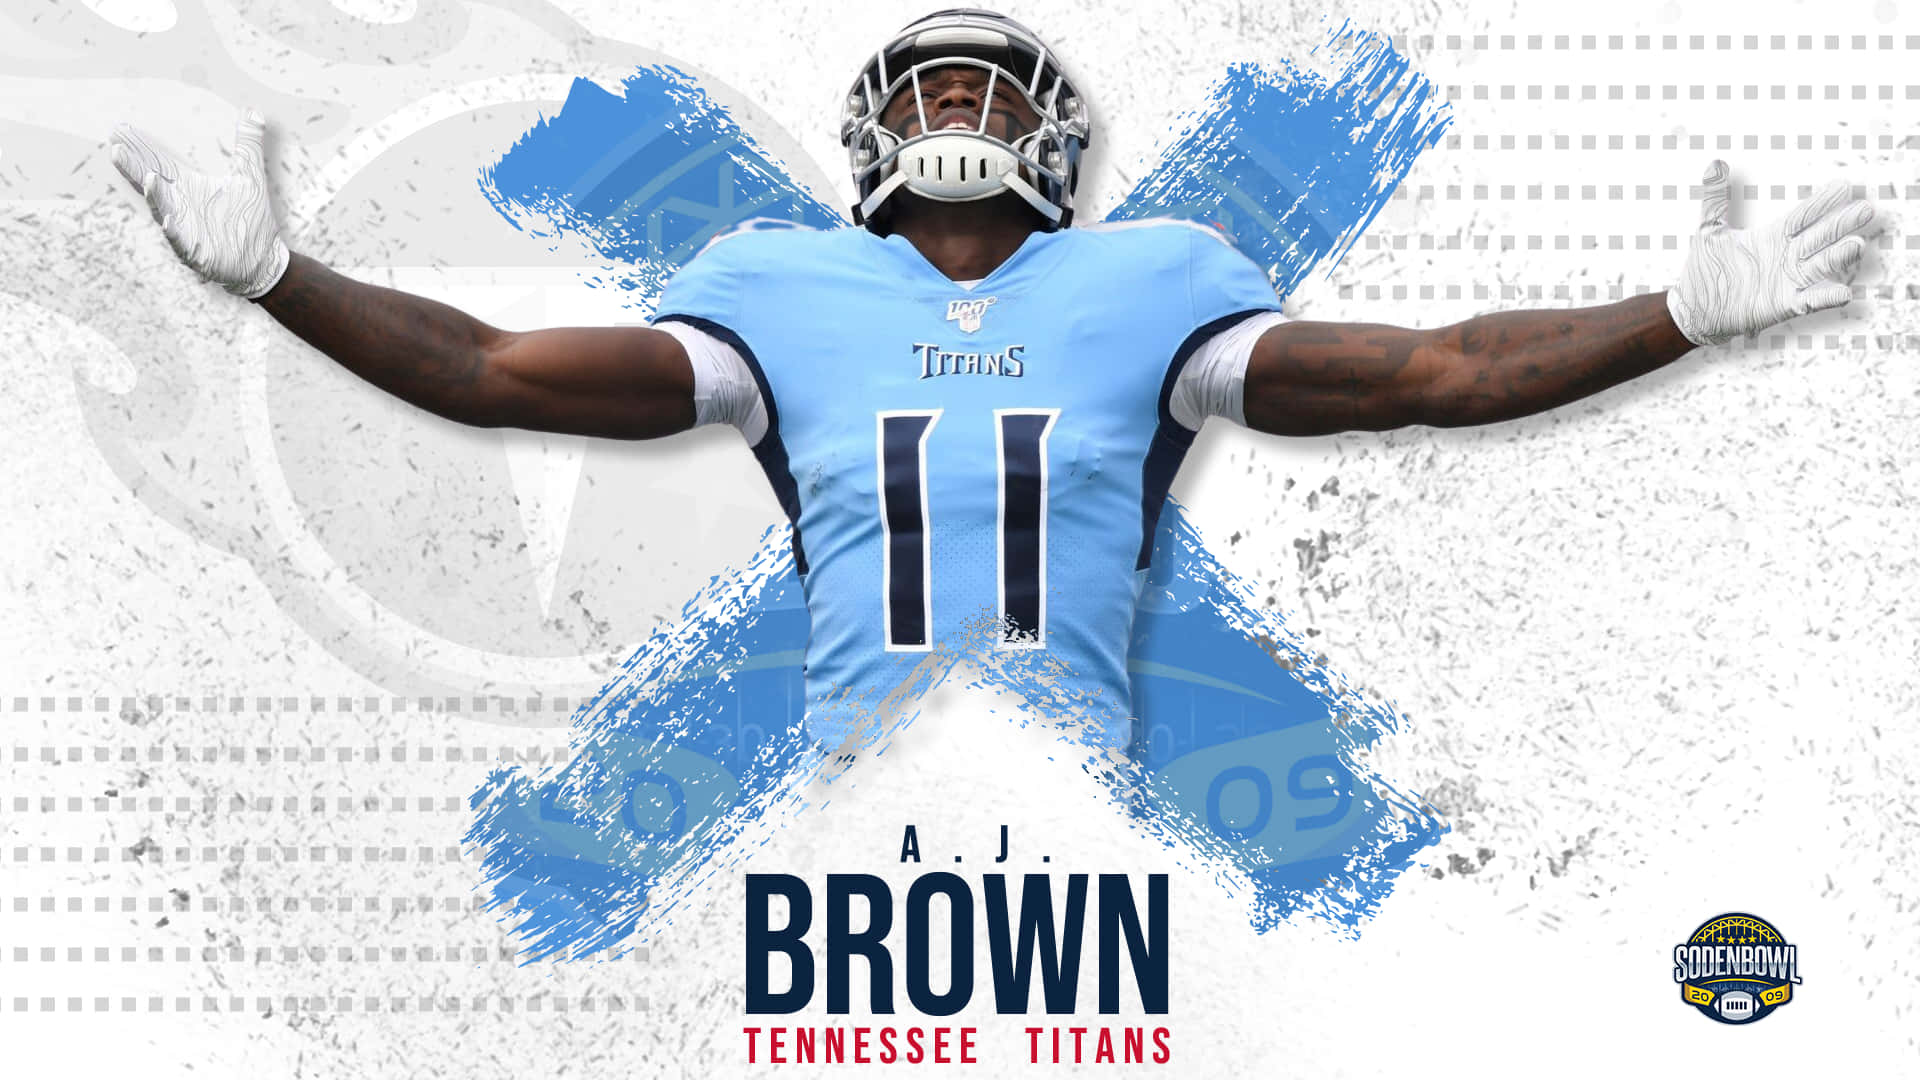 AJ Brown of the Titans proudly displaying his number 11 jersey Wallpaper